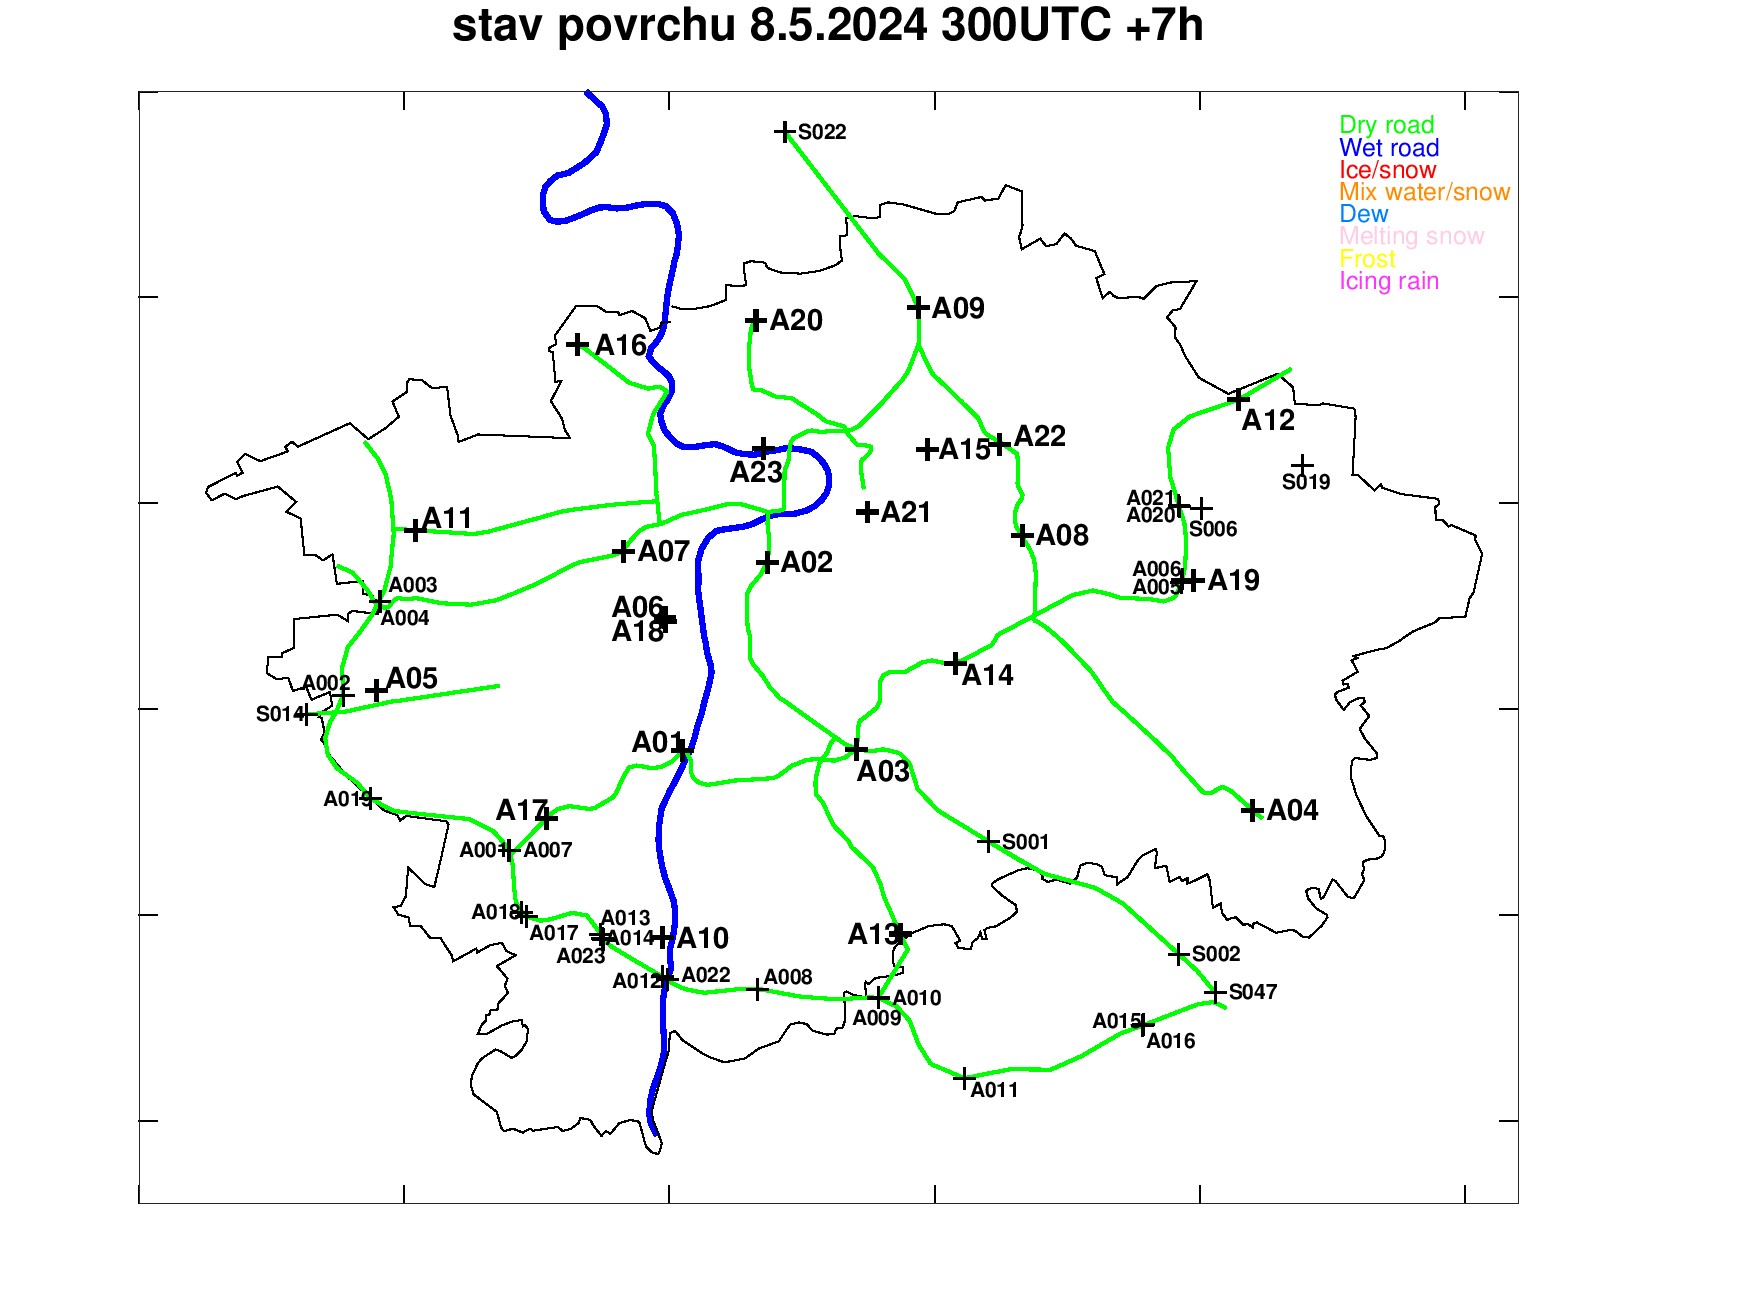 Road surface condition forecast for Pragu +7h